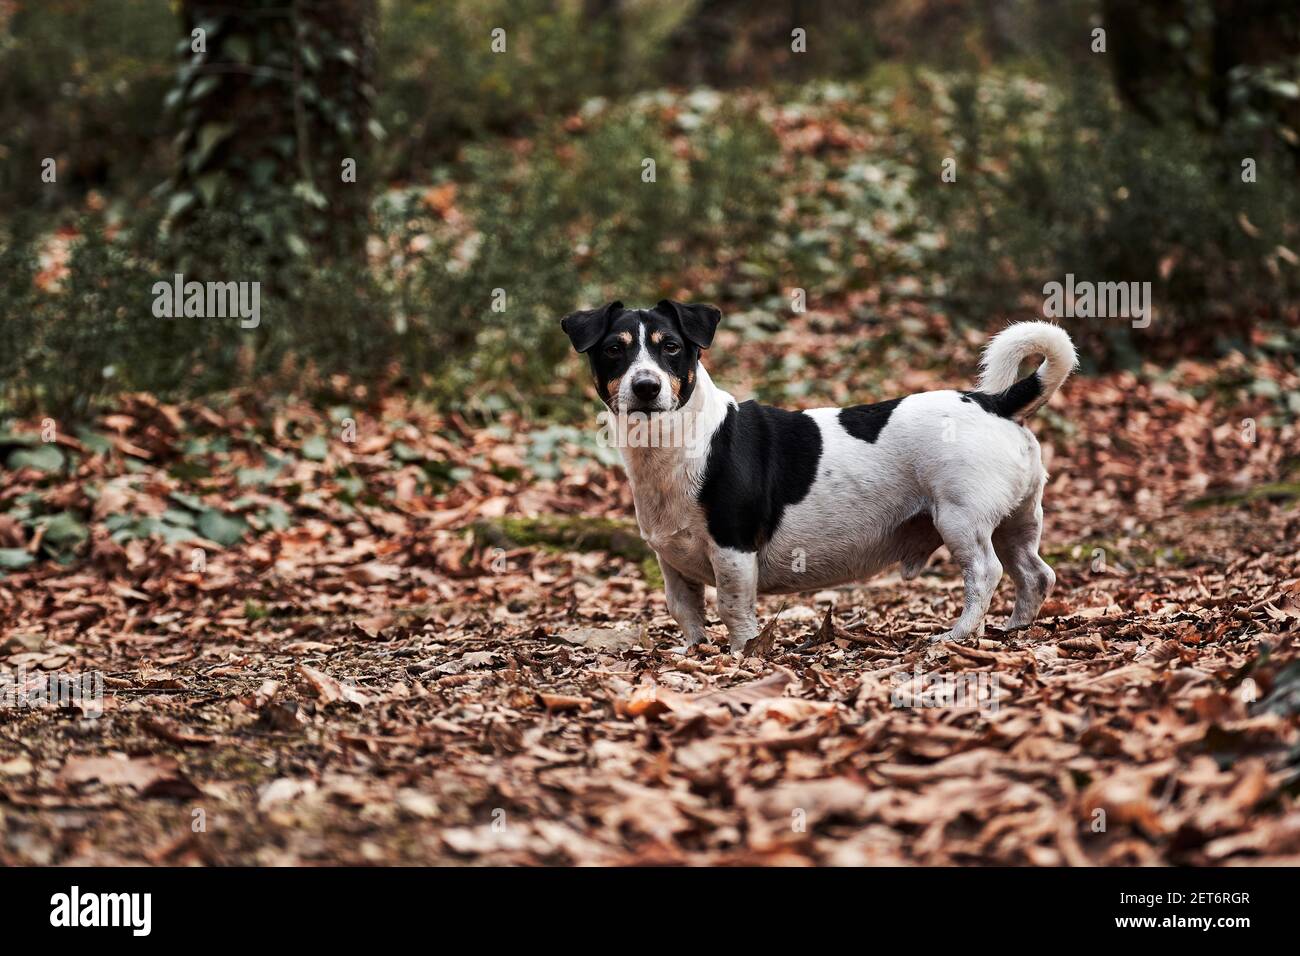 Charming Black And White Smooth Jack Russell Walks Through Autumn Forest And Poses Small English Hunting Dog Breed Smooth Haired Jack Russell Terrie Stock Photo Alamy